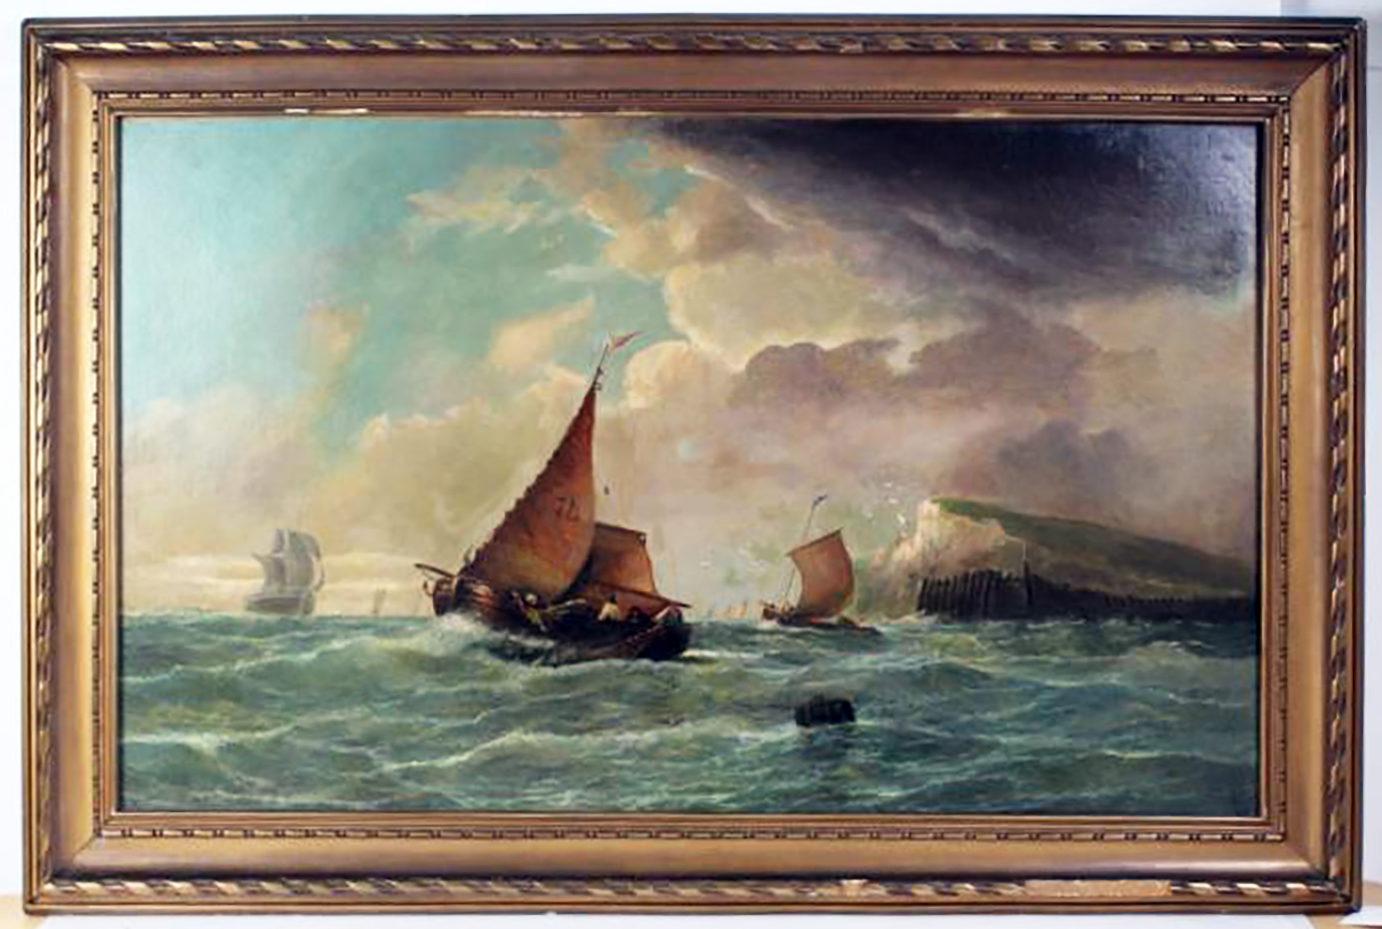 Thomas Lintott Landscape Painting - Large 19th Century Dutch Marine Oil Painting of Ships off the Coast